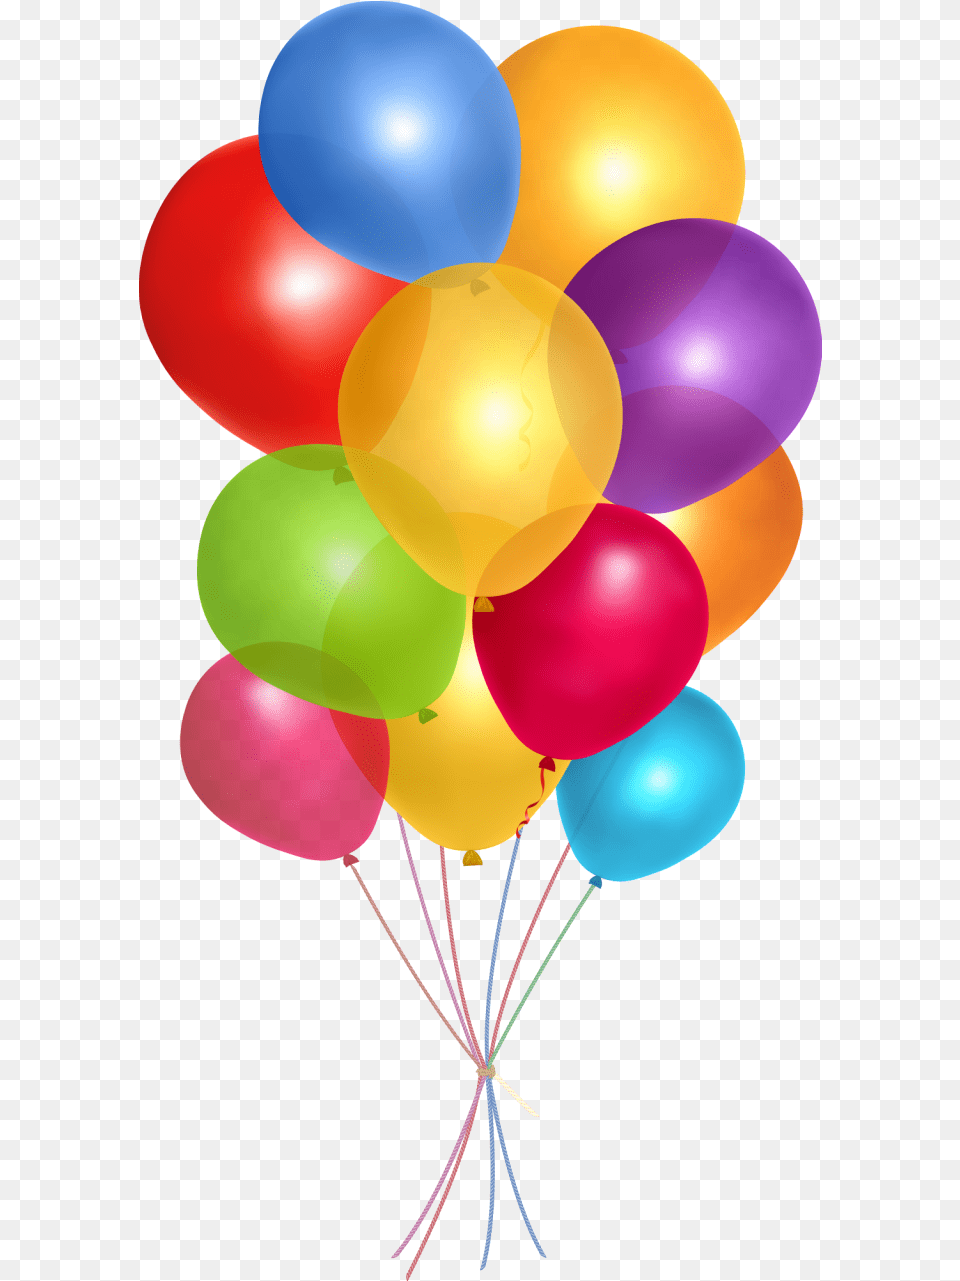 Balloon Balloons File Hd Clipart Background Balloons Clipart Free Transparent Png